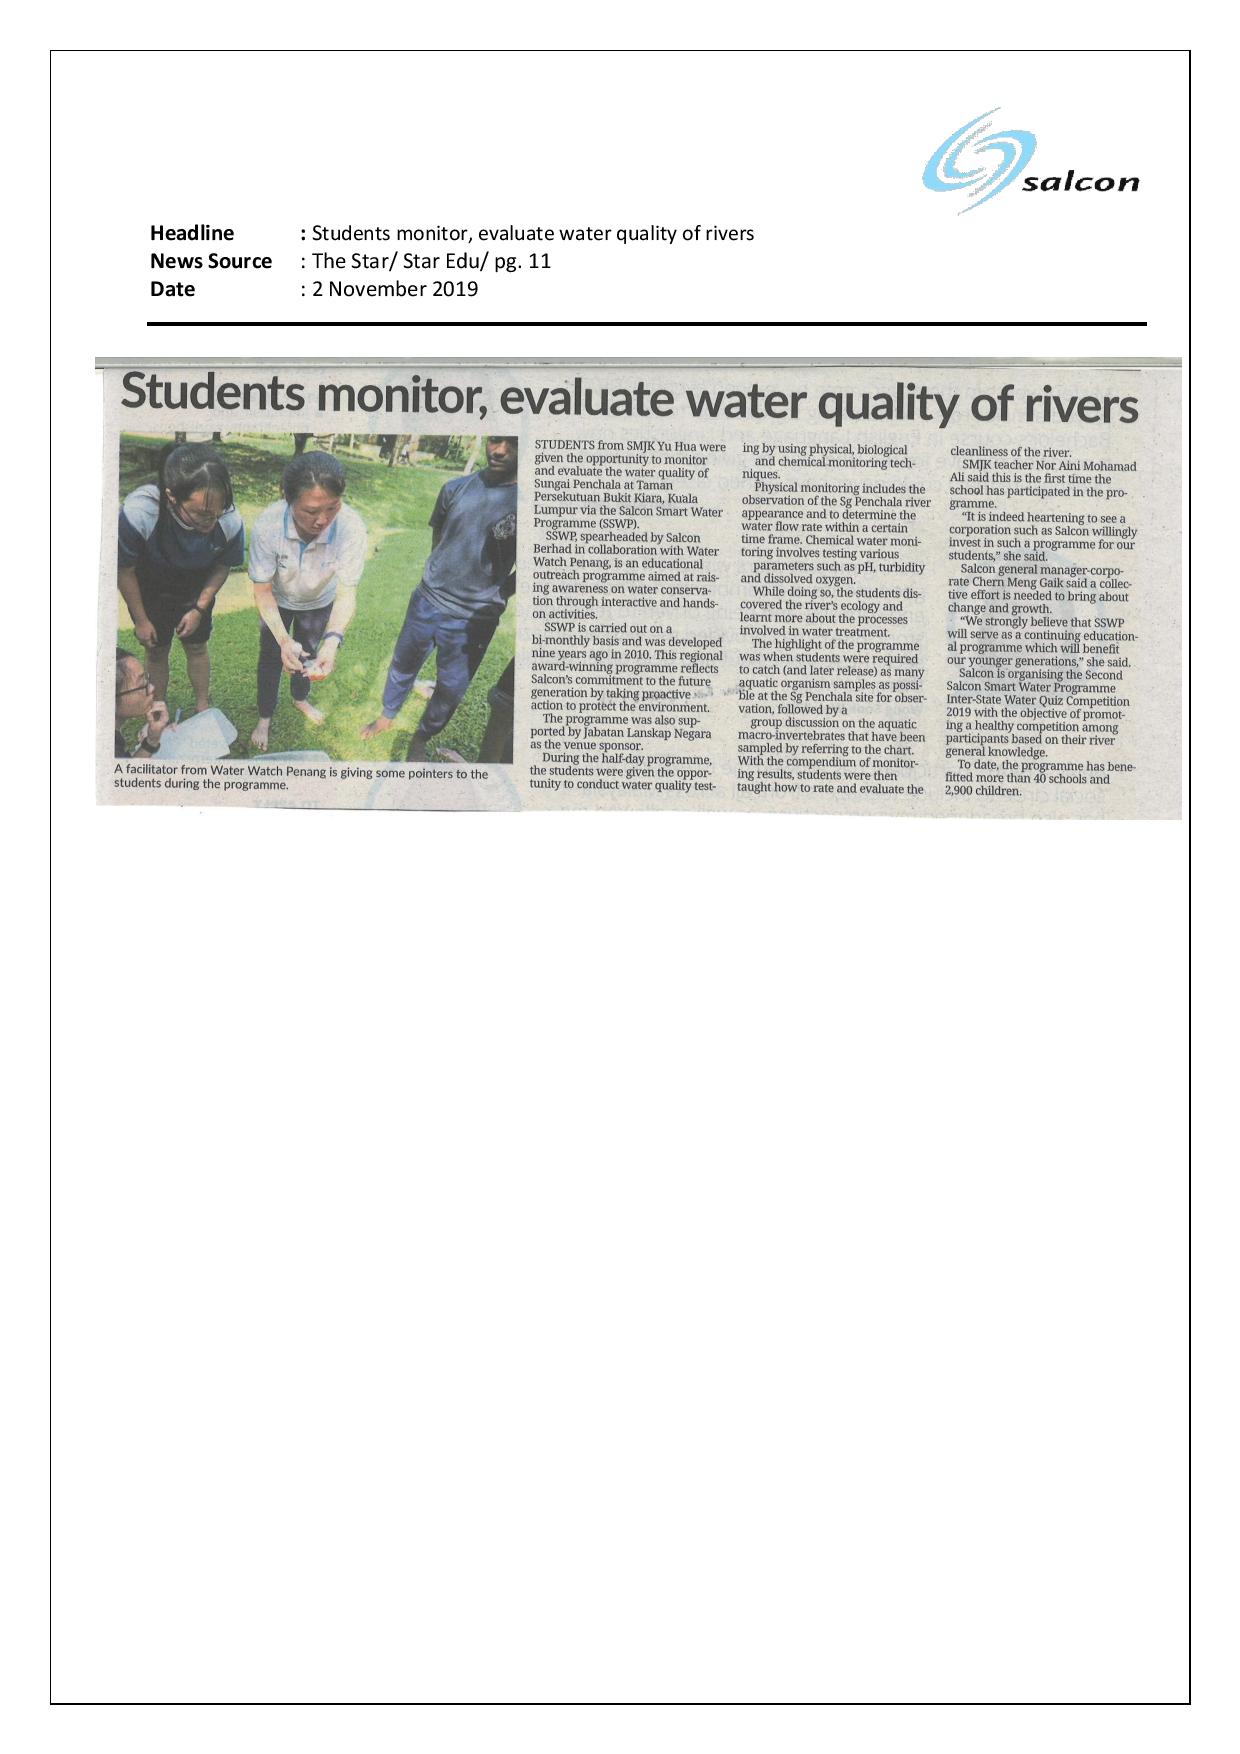 Students monitor, evaluate water quality of rivers